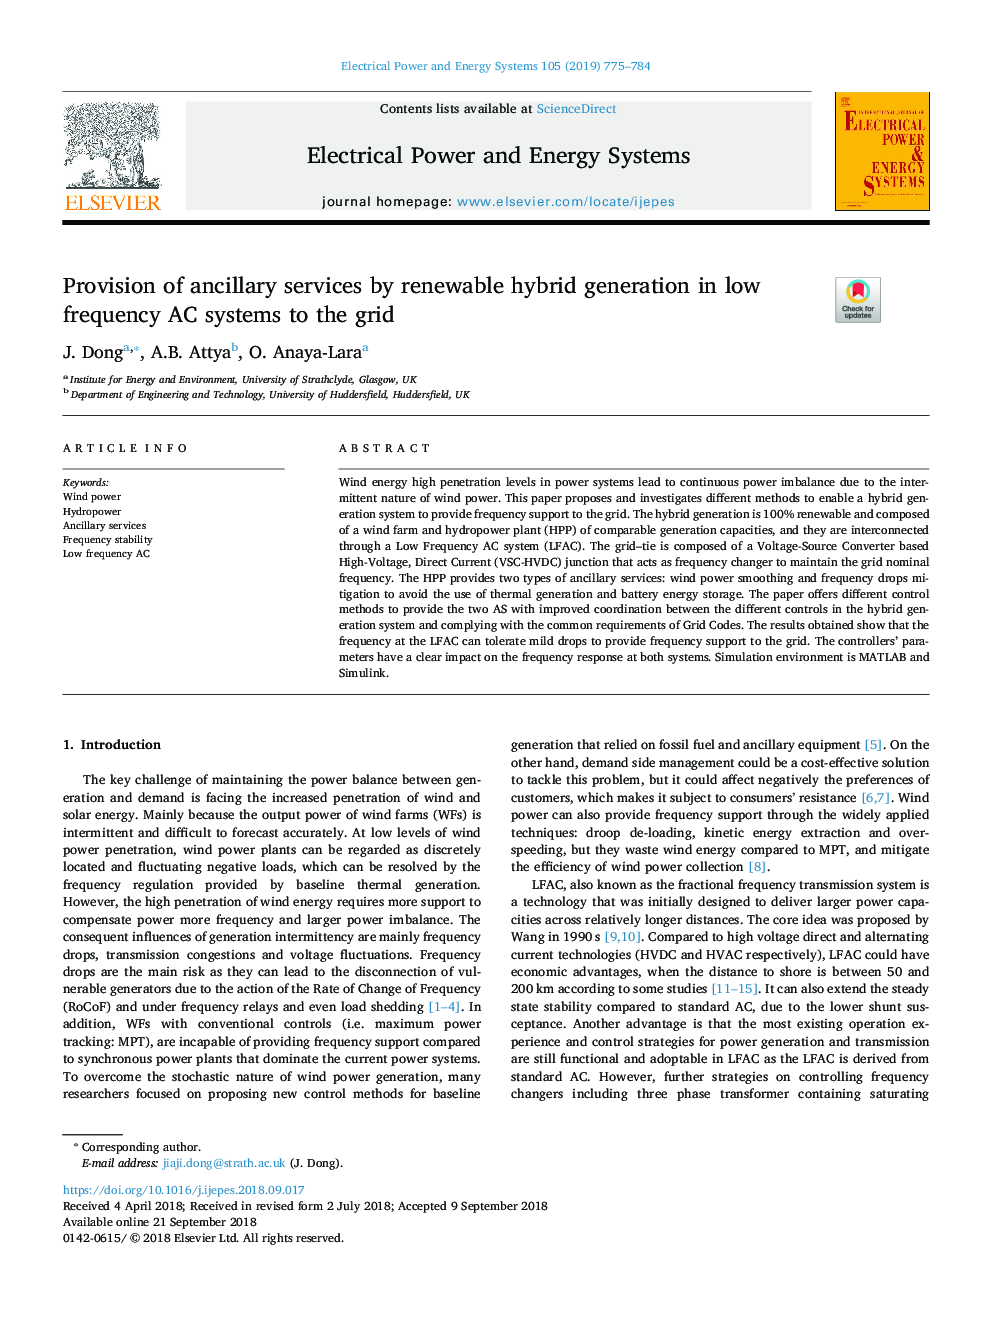 Provision of ancillary services by renewable hybrid generation in low frequency AC systems to the grid